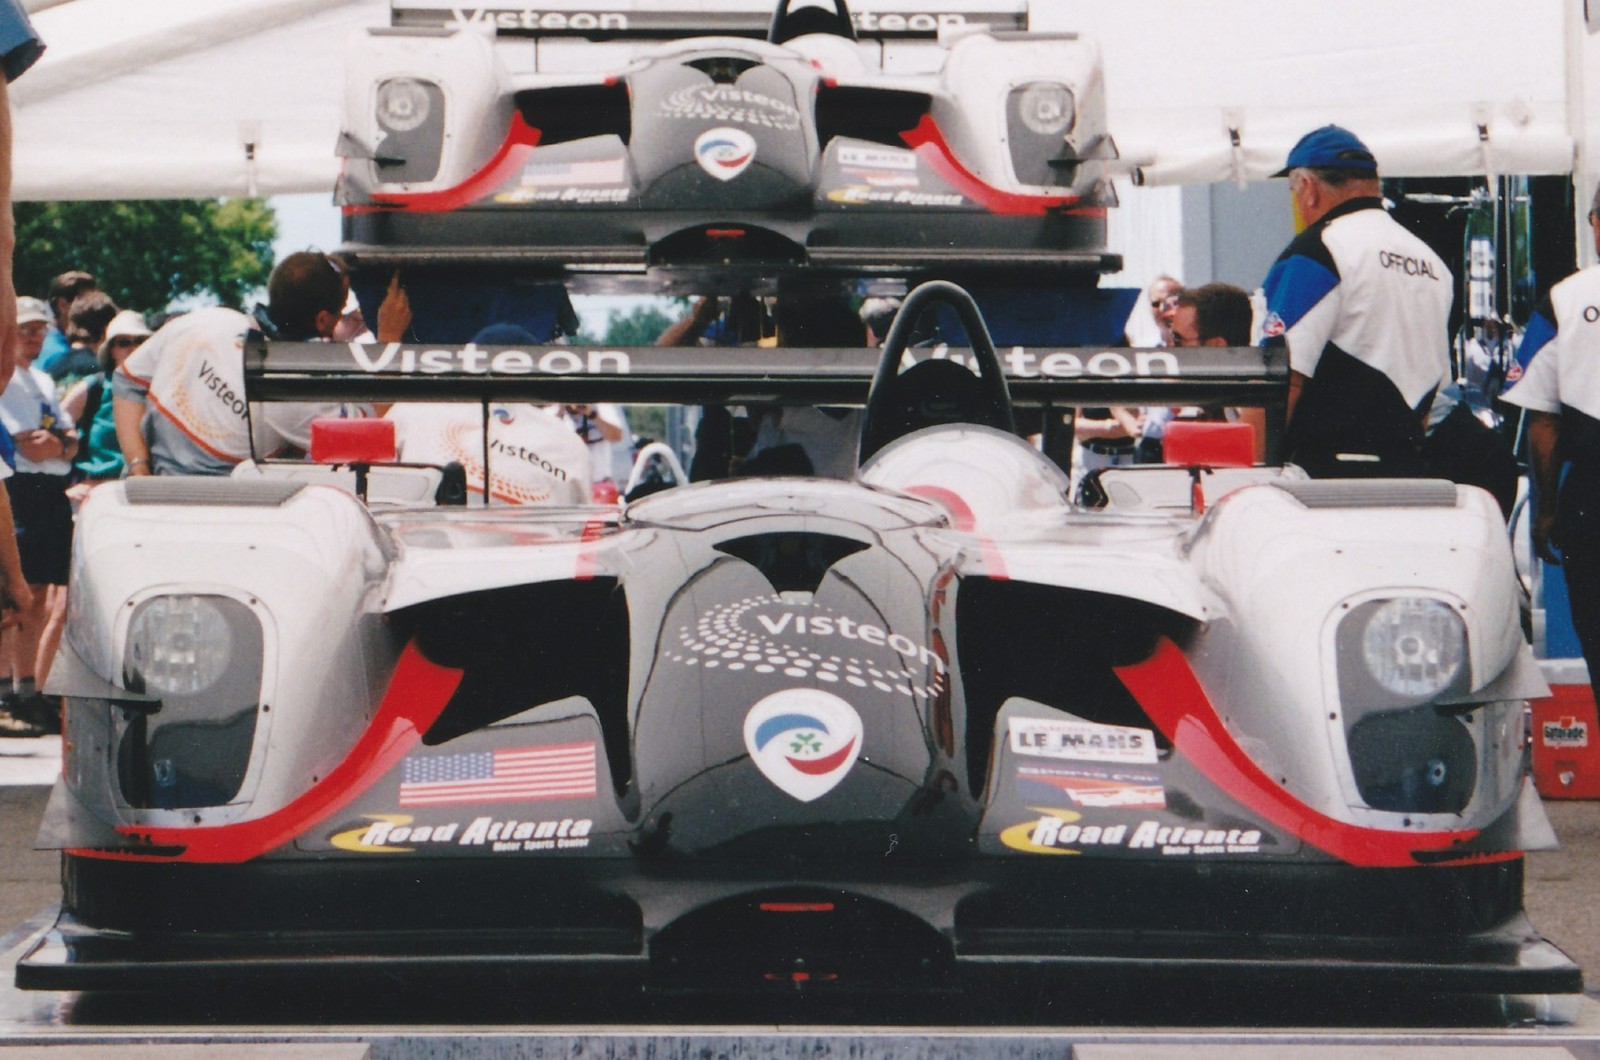 <p>The Panoz LMP-1 is a late ‘90s race car designed as the successor of the Esperante GTR-1. It stands out for its unconventional engine layout, with the front-mounted 6.0-liter V8 engine challenging the typical design of racing vehicles. In many ways, the Panoz LMP-1 comes full circle from Lance Reventlow’s front-engined Scarab F1.</p><p>The Panoz LMP-1 achieved a noteworthy performance in the 1999 24 Hours of Le Mans with seventh and eighth place finishes and won the IMSA Manufacturer’s Championship that same year. Despite its eventual retirement in 2003, the LMP-1 is still remembered for its unconventional design choices and performance in the American Le Mans Series.</p>